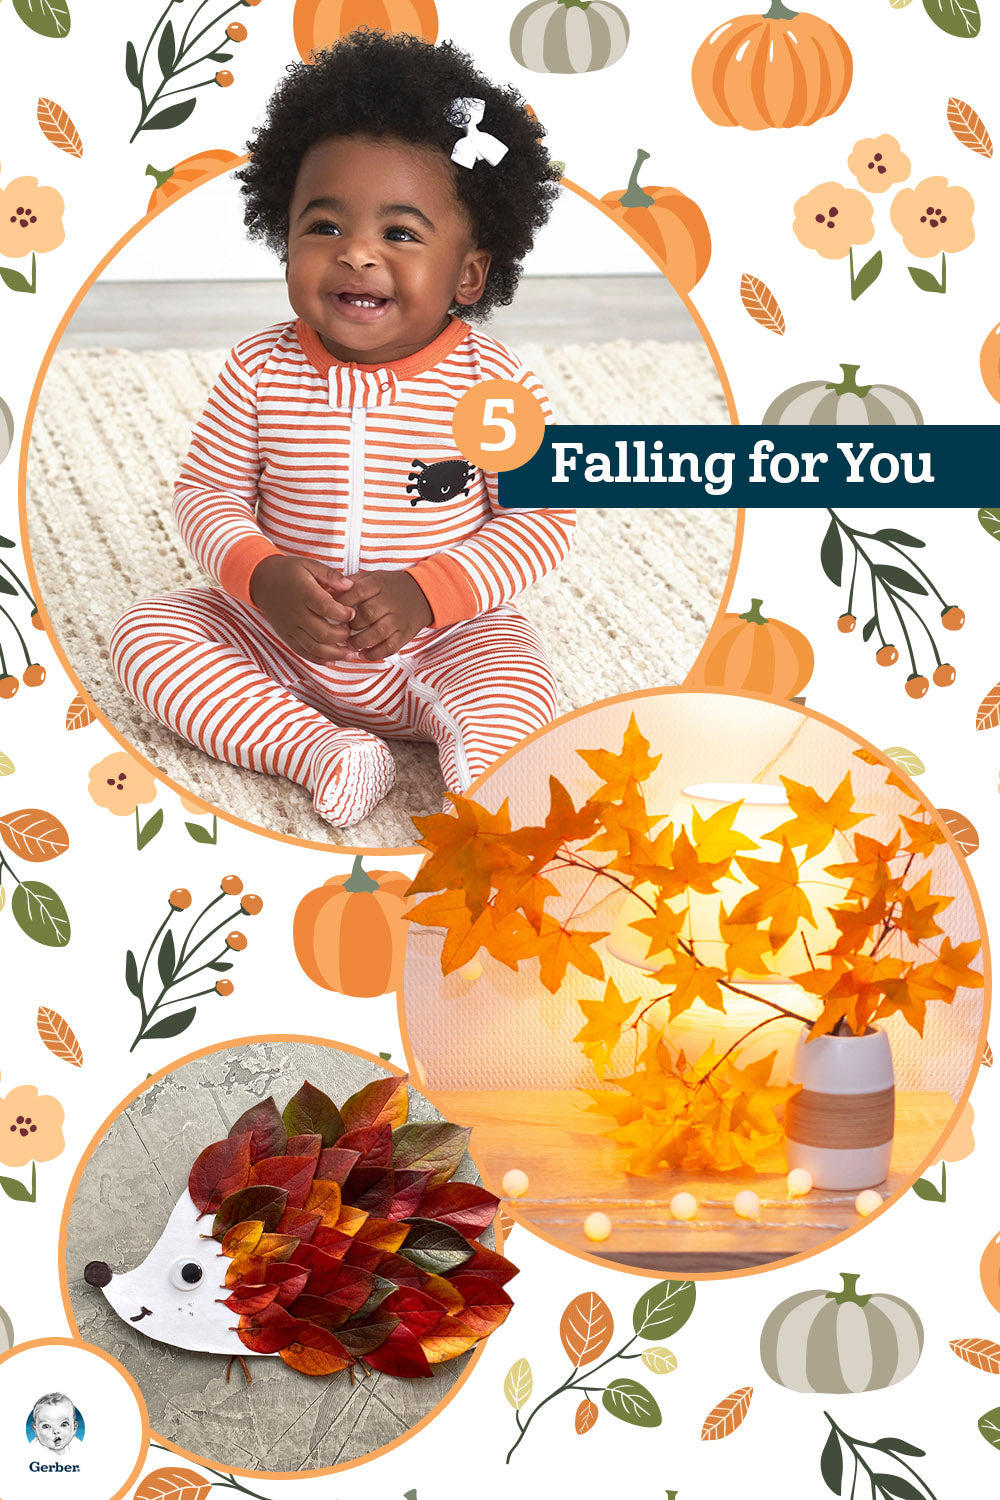 Small young child enjoying a "Falling for You" autumn party